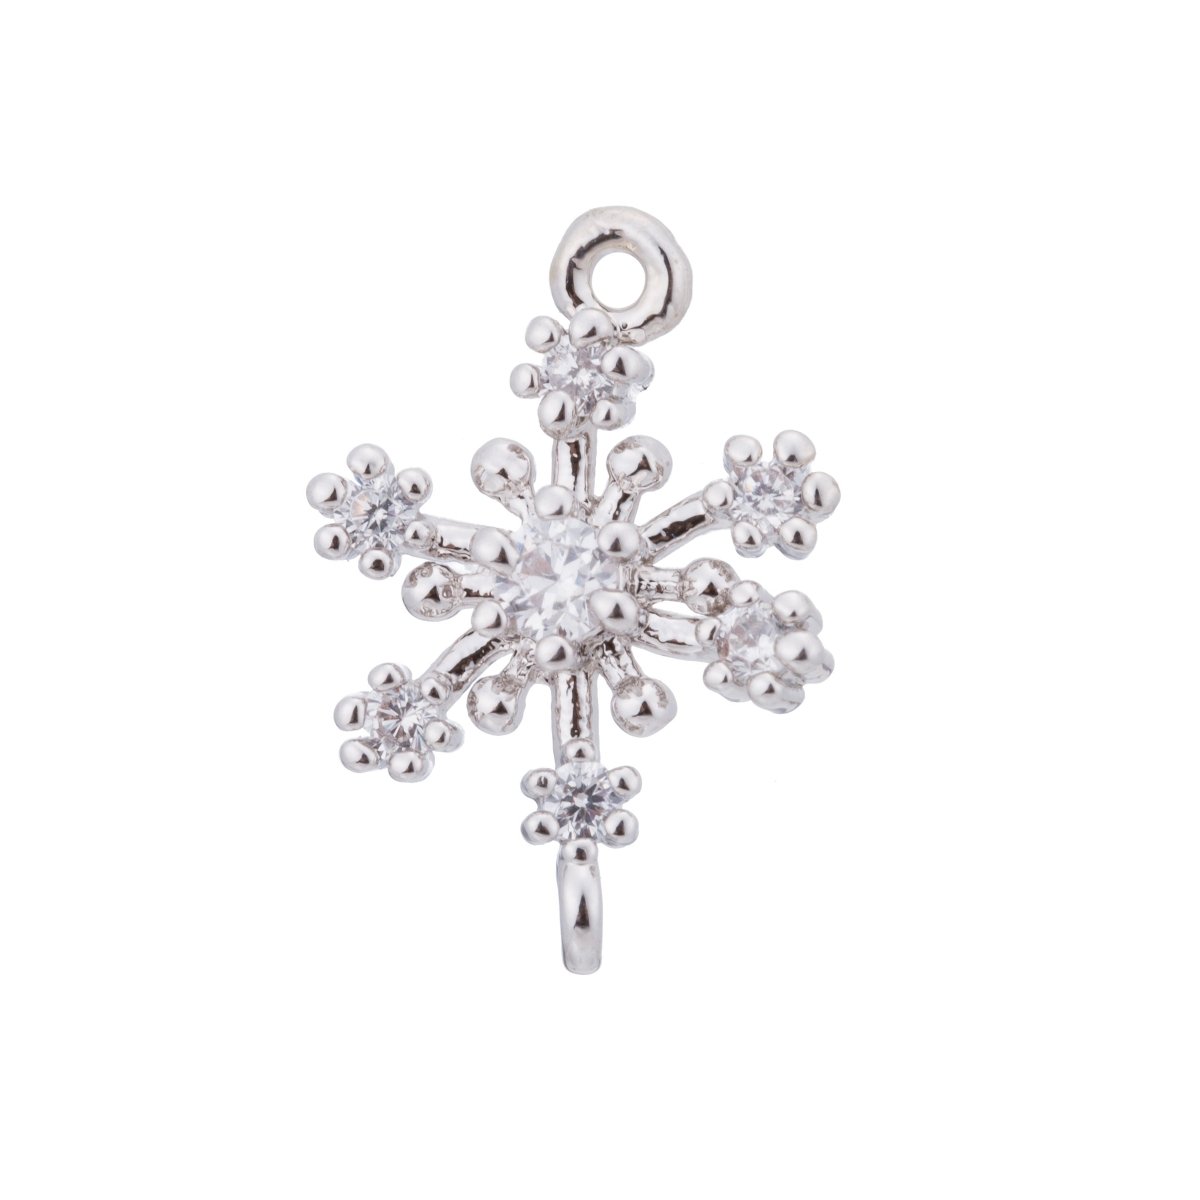 Golden / Silver Snow Flake, Gold Snowflake, Winter Frost, Frozen DIY Craft Cubic Zirconia Bracelet Charm Bead Finding Pendant For Jewelry Making, CL-C-170 - DLUXCA